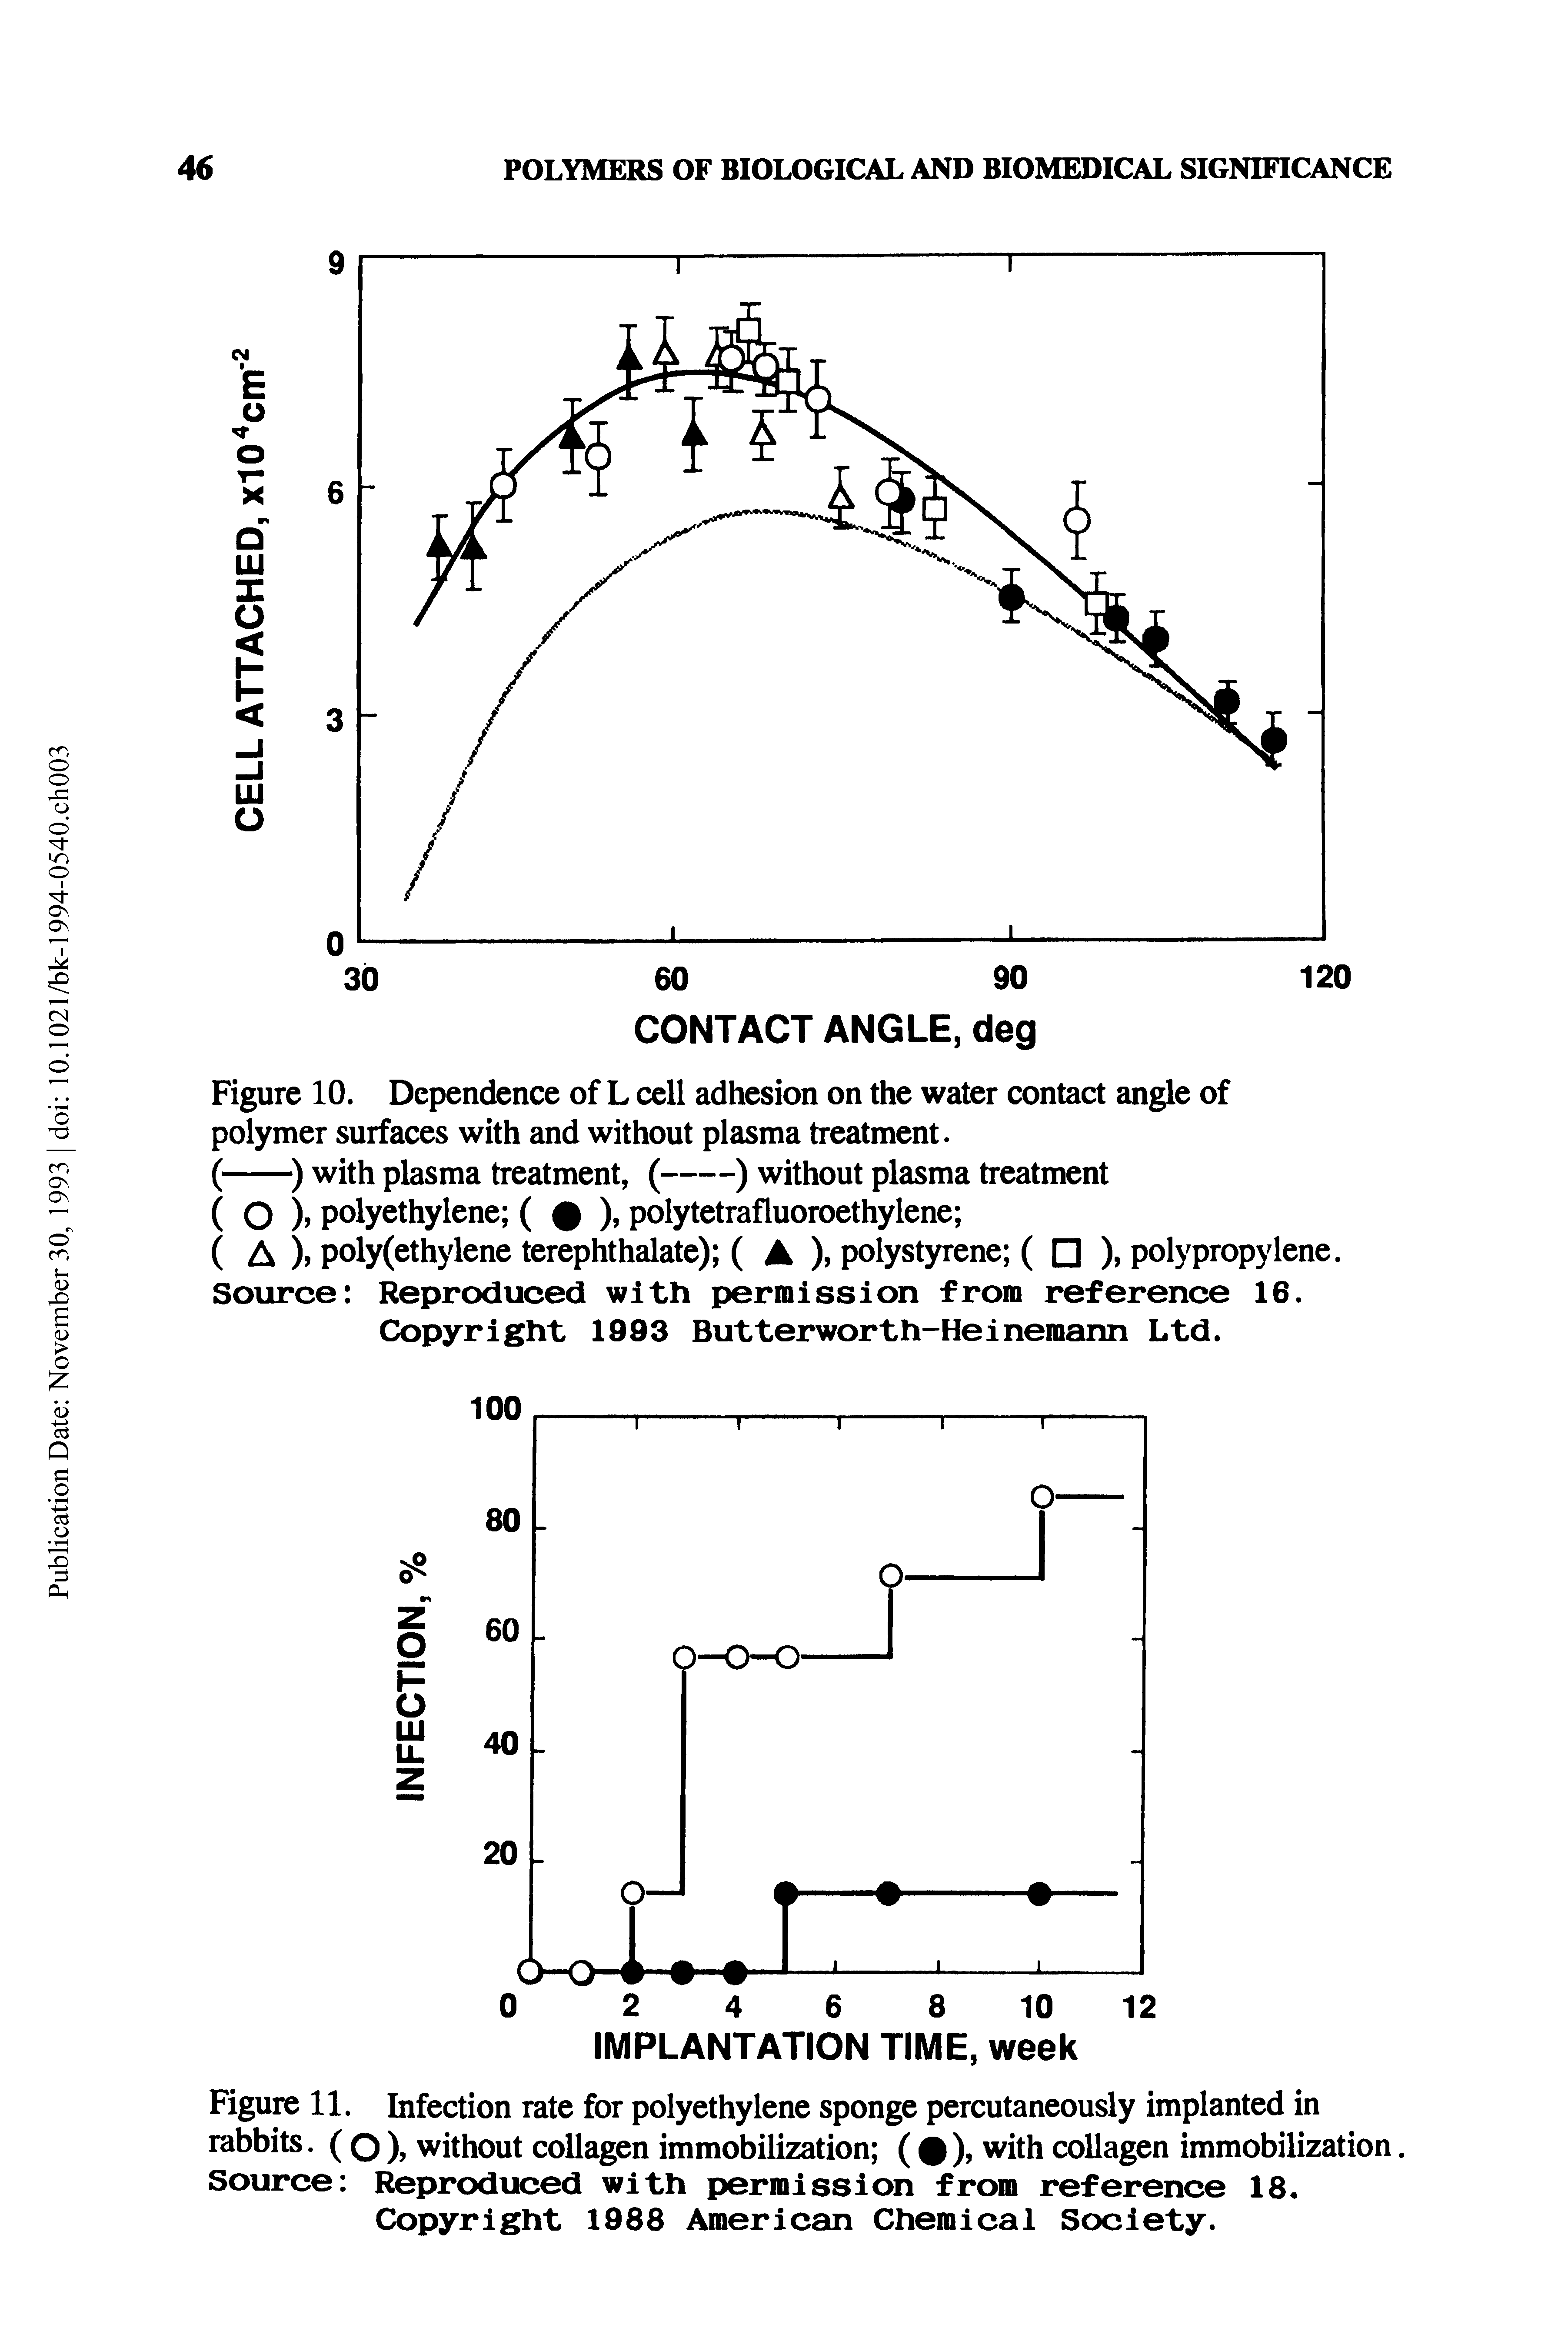 Figure 11. Infection rate for polyethylene sponge percutaneously implanted in rabbits. (OX without collagen immobilization ( ), with collagen immobilization. Source Reproduced with permission from reference 18. Copyright 1988 American Chemical Society.